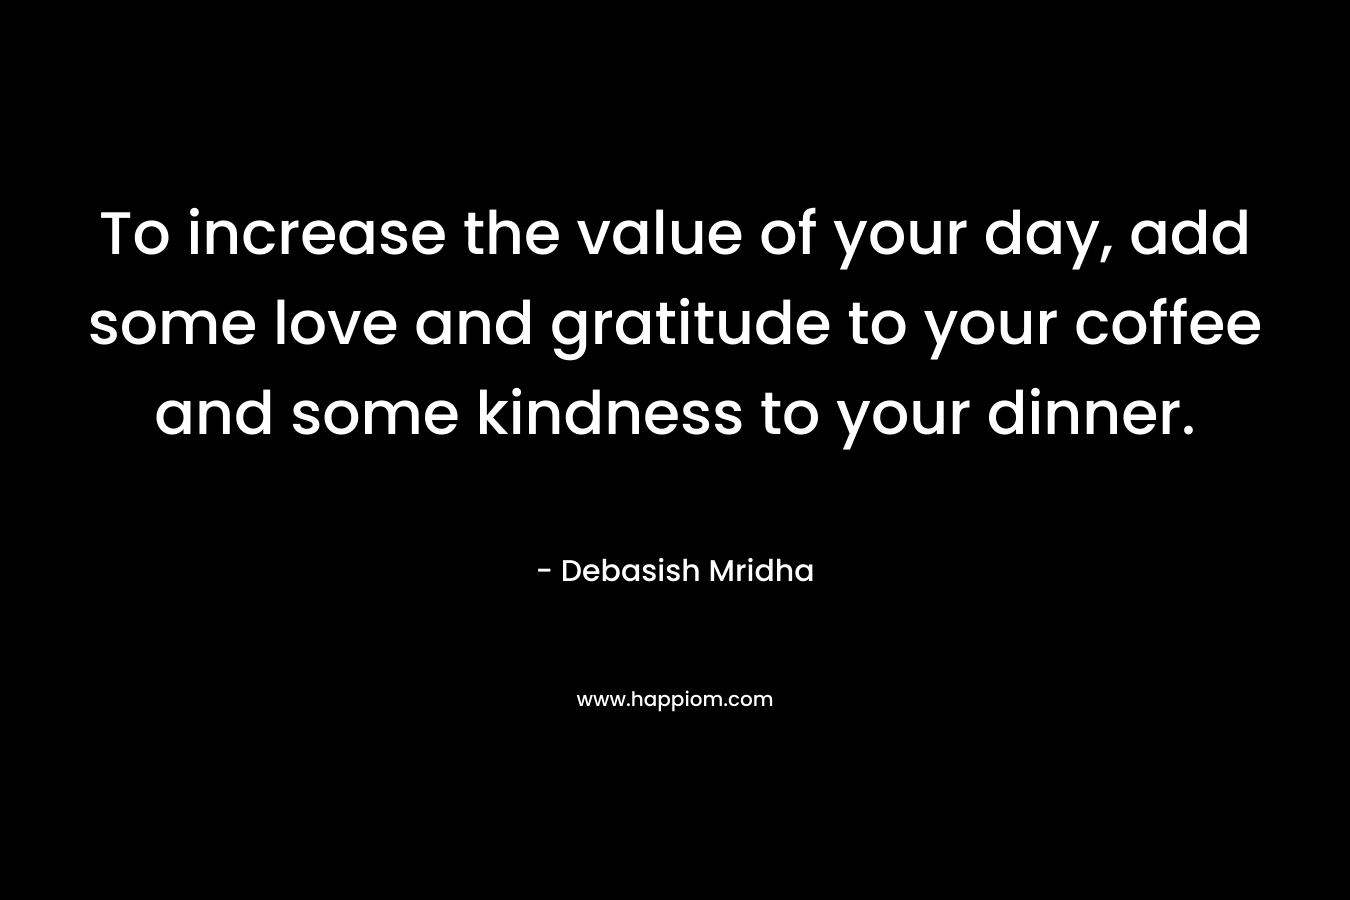 To increase the value of your day, add some love and gratitude to your coffee and some kindness to your dinner.